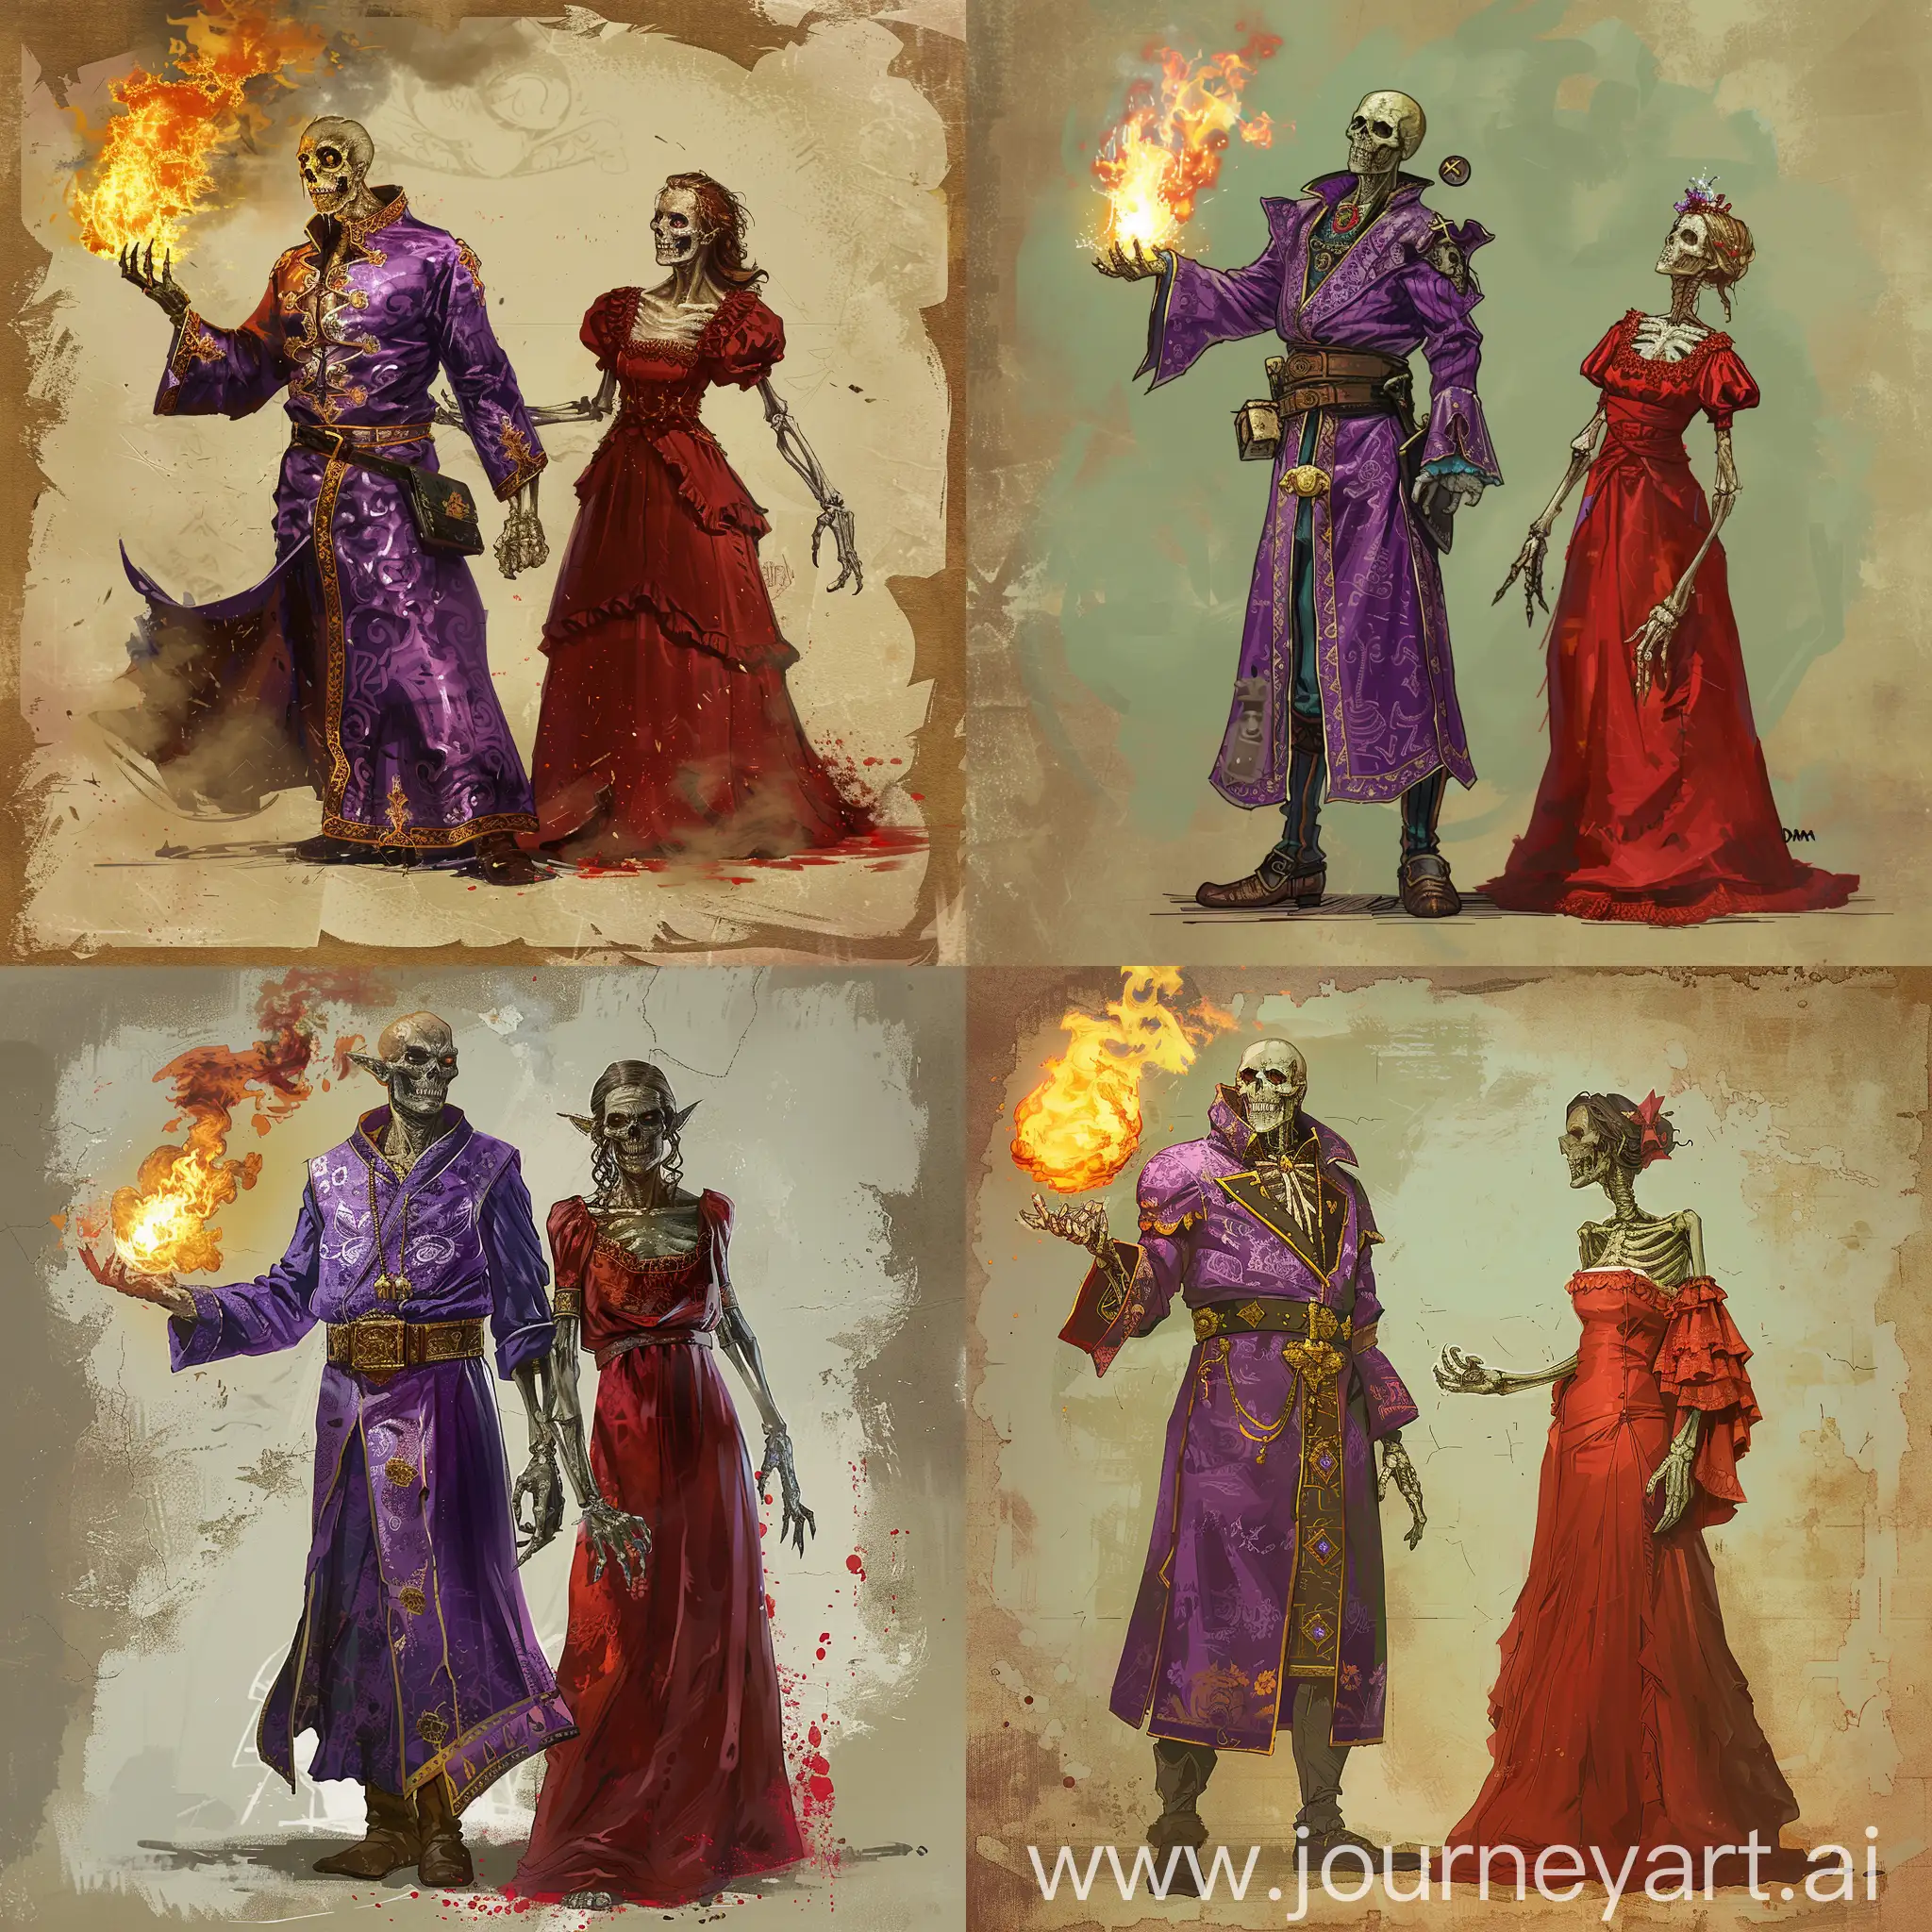 DnD portrait. A undead mage in an expensive purple robe with a fireball. Next to it stands a undead maid in a red dress